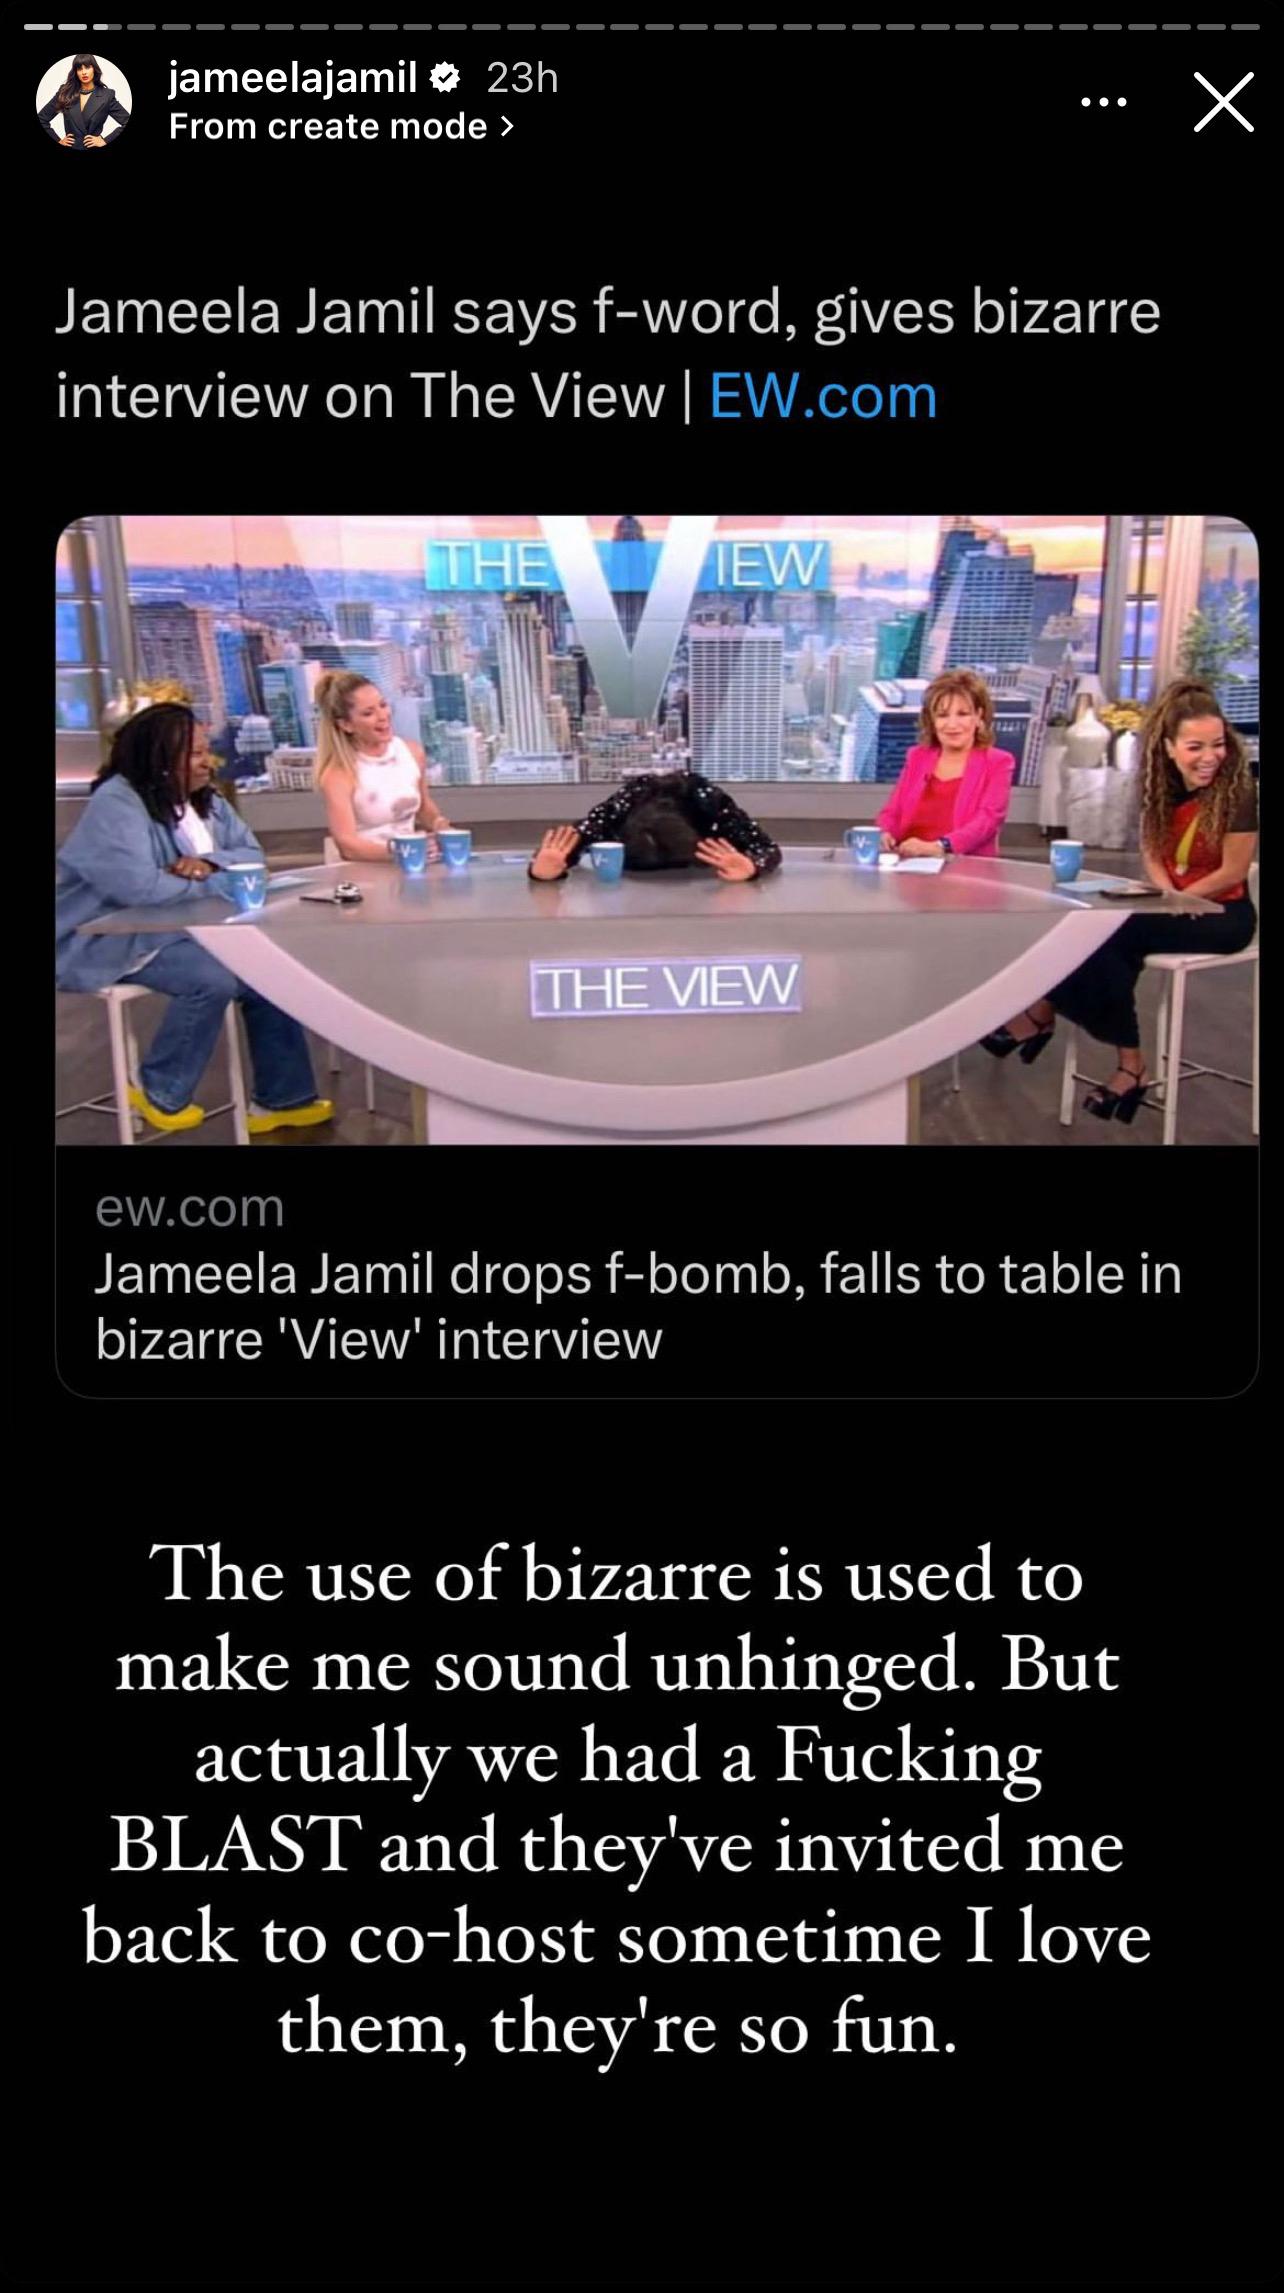 Jameela Jamil Reacts To Media's Coverage Of Her Appearance On 'The View'